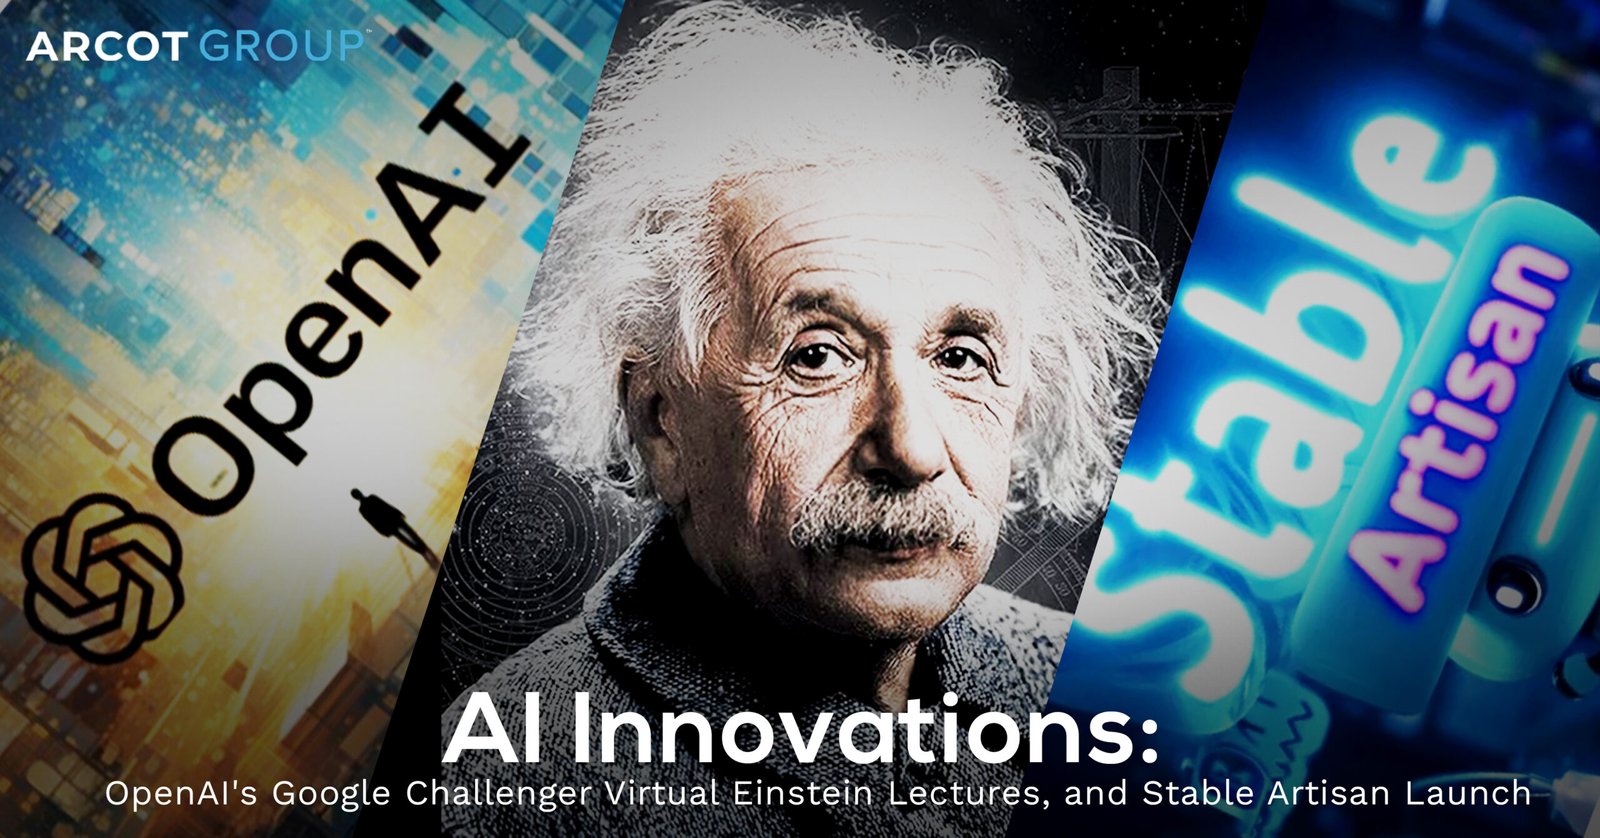 AI Innovations: Virtual Einstein Lectures, Stable Artisan Launch, and OpenAI’s Google Challenger